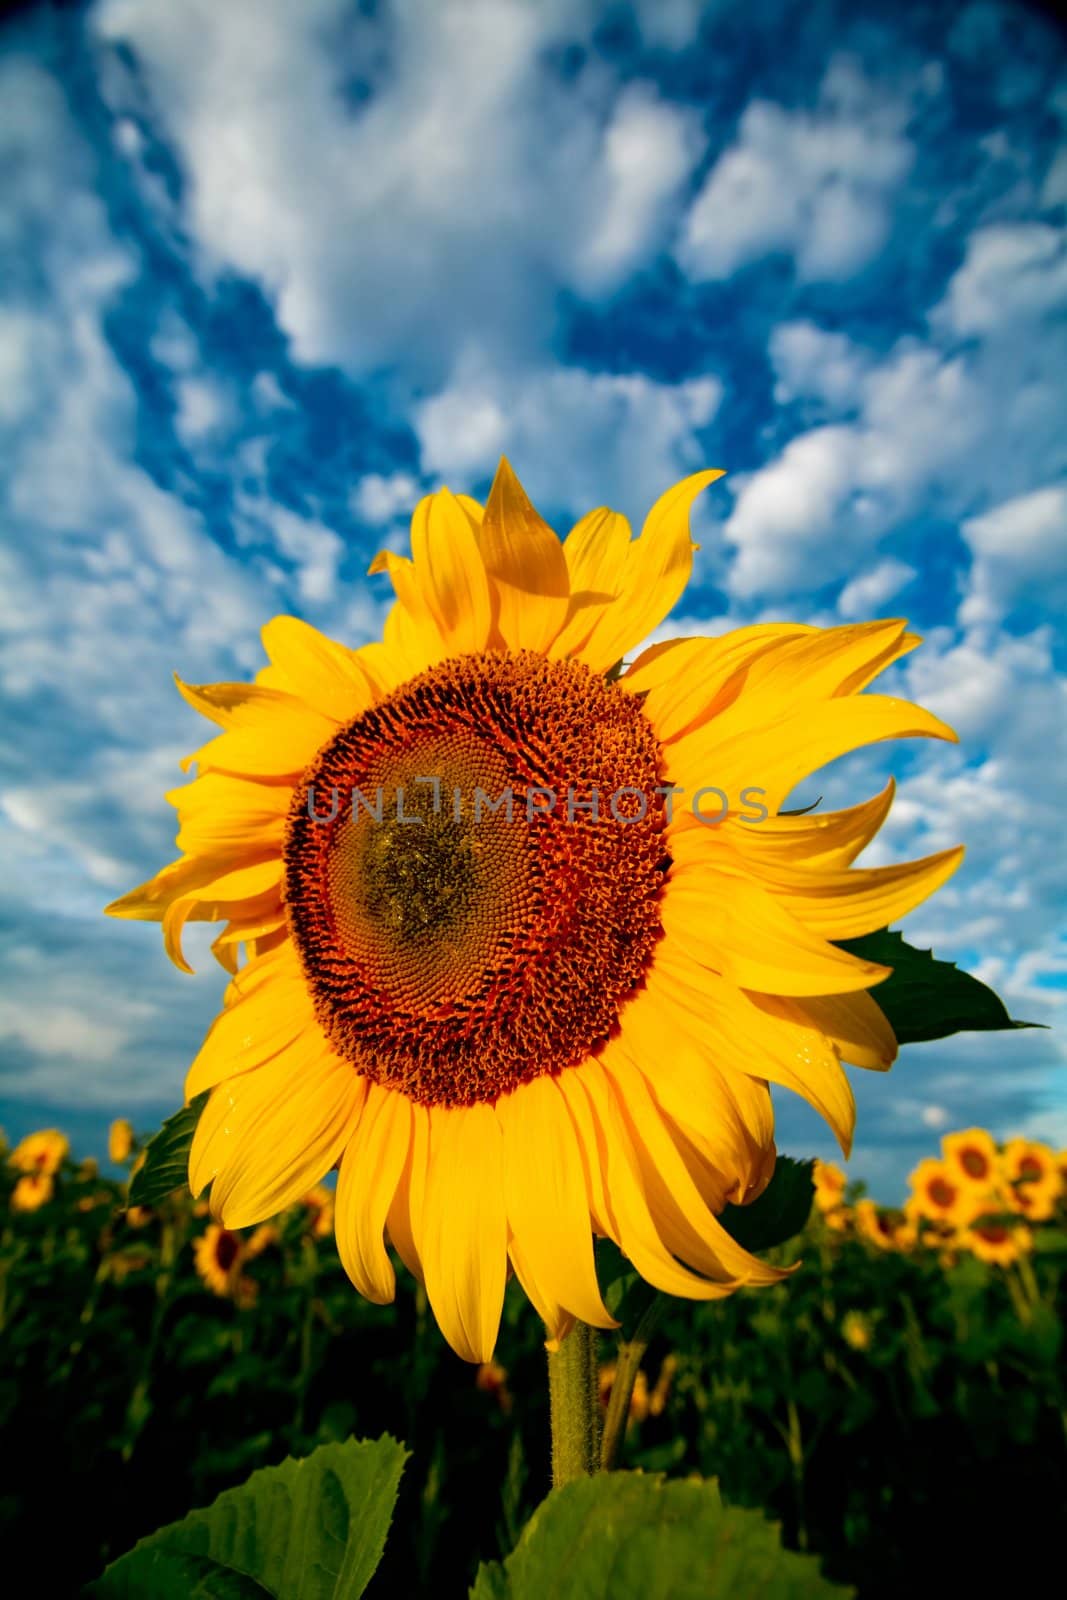 An image of sunflower on background of blue sky with white clouds